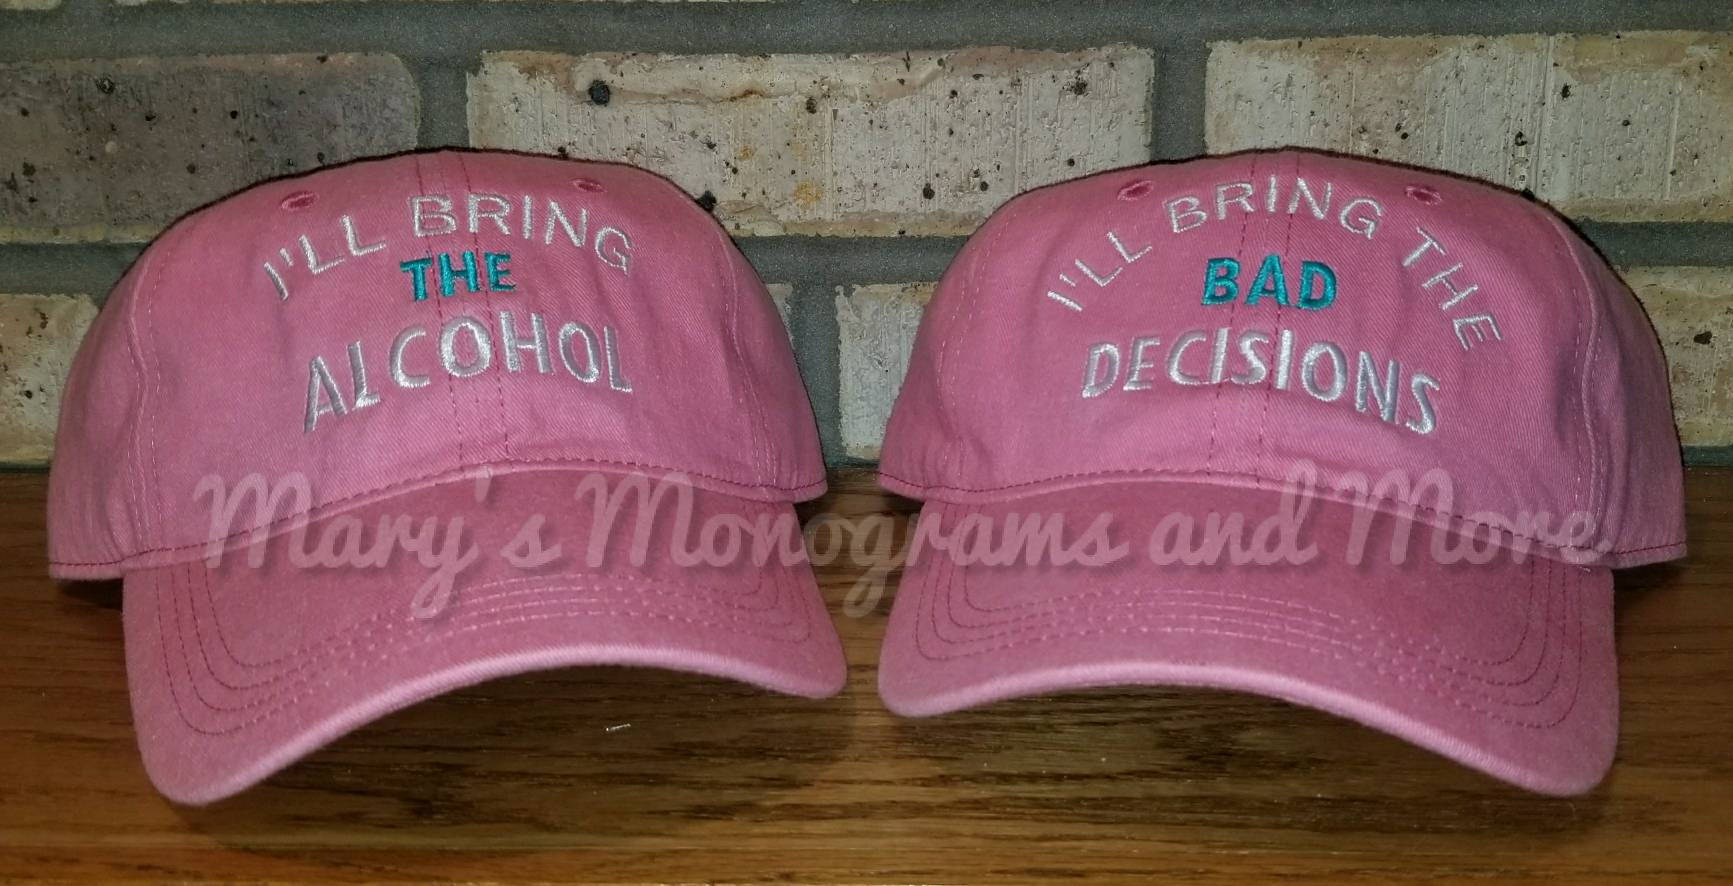 Free Shipping, Set of 2, I'll bring the alcohol, I'll bring the bad decisions baseball hat set, bff, birthday, drinking, custom, party hat